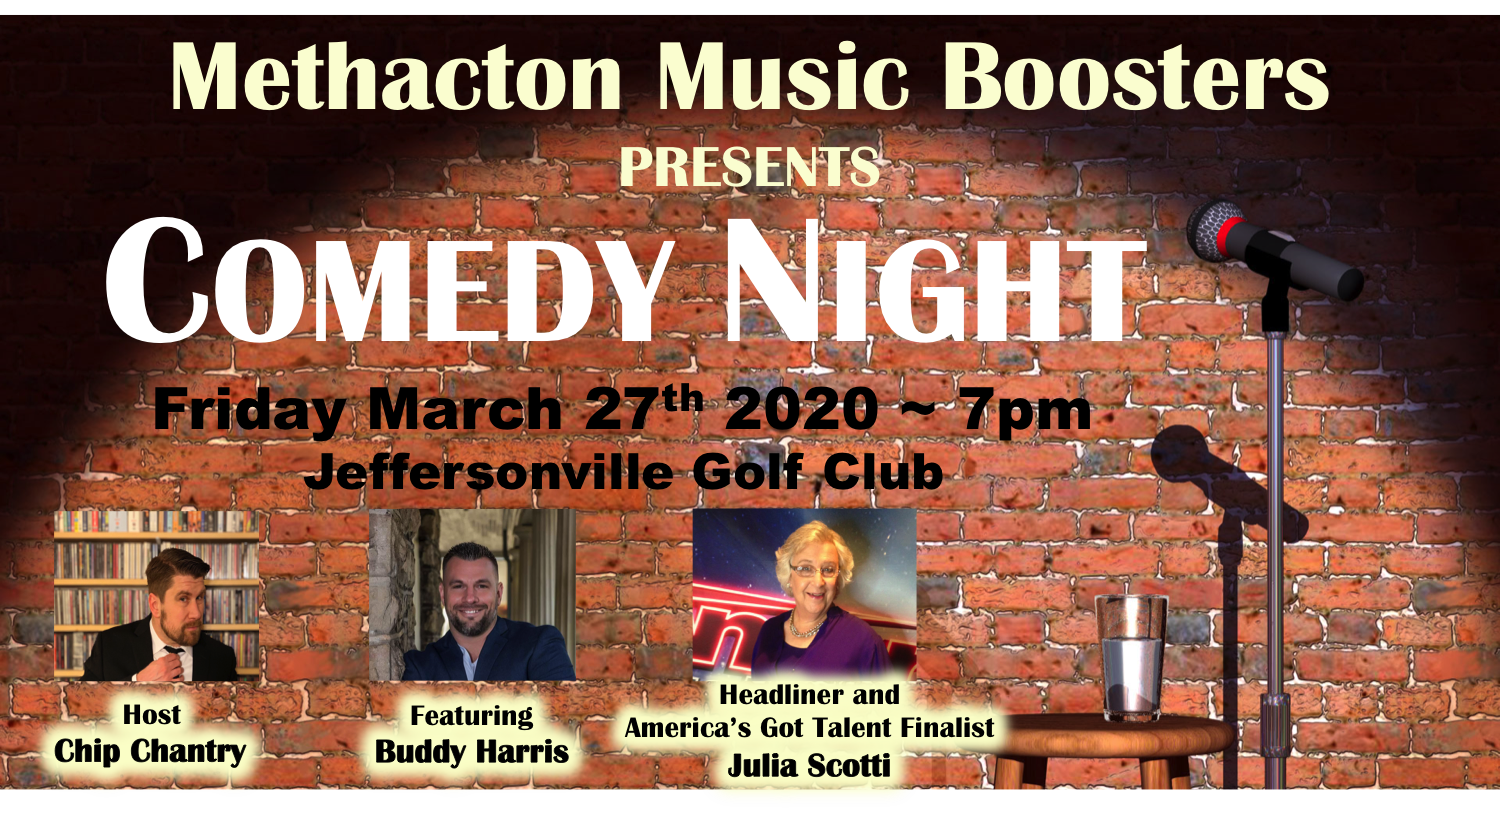 COMEDY NIGHT 2020 by Methacton Music Boosters